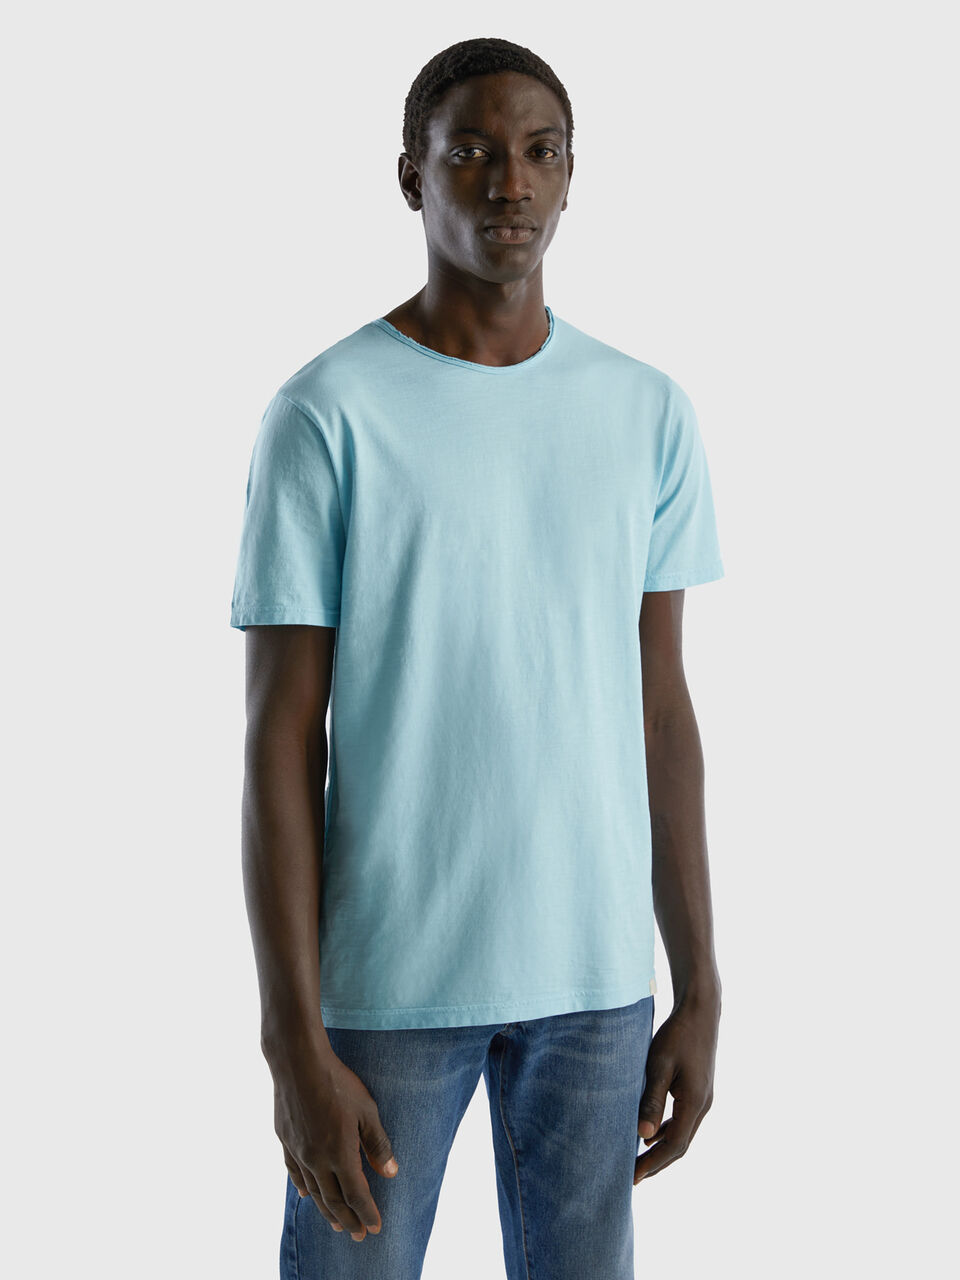 Turquoise t-shirt in cotton - Turquoise Benetton